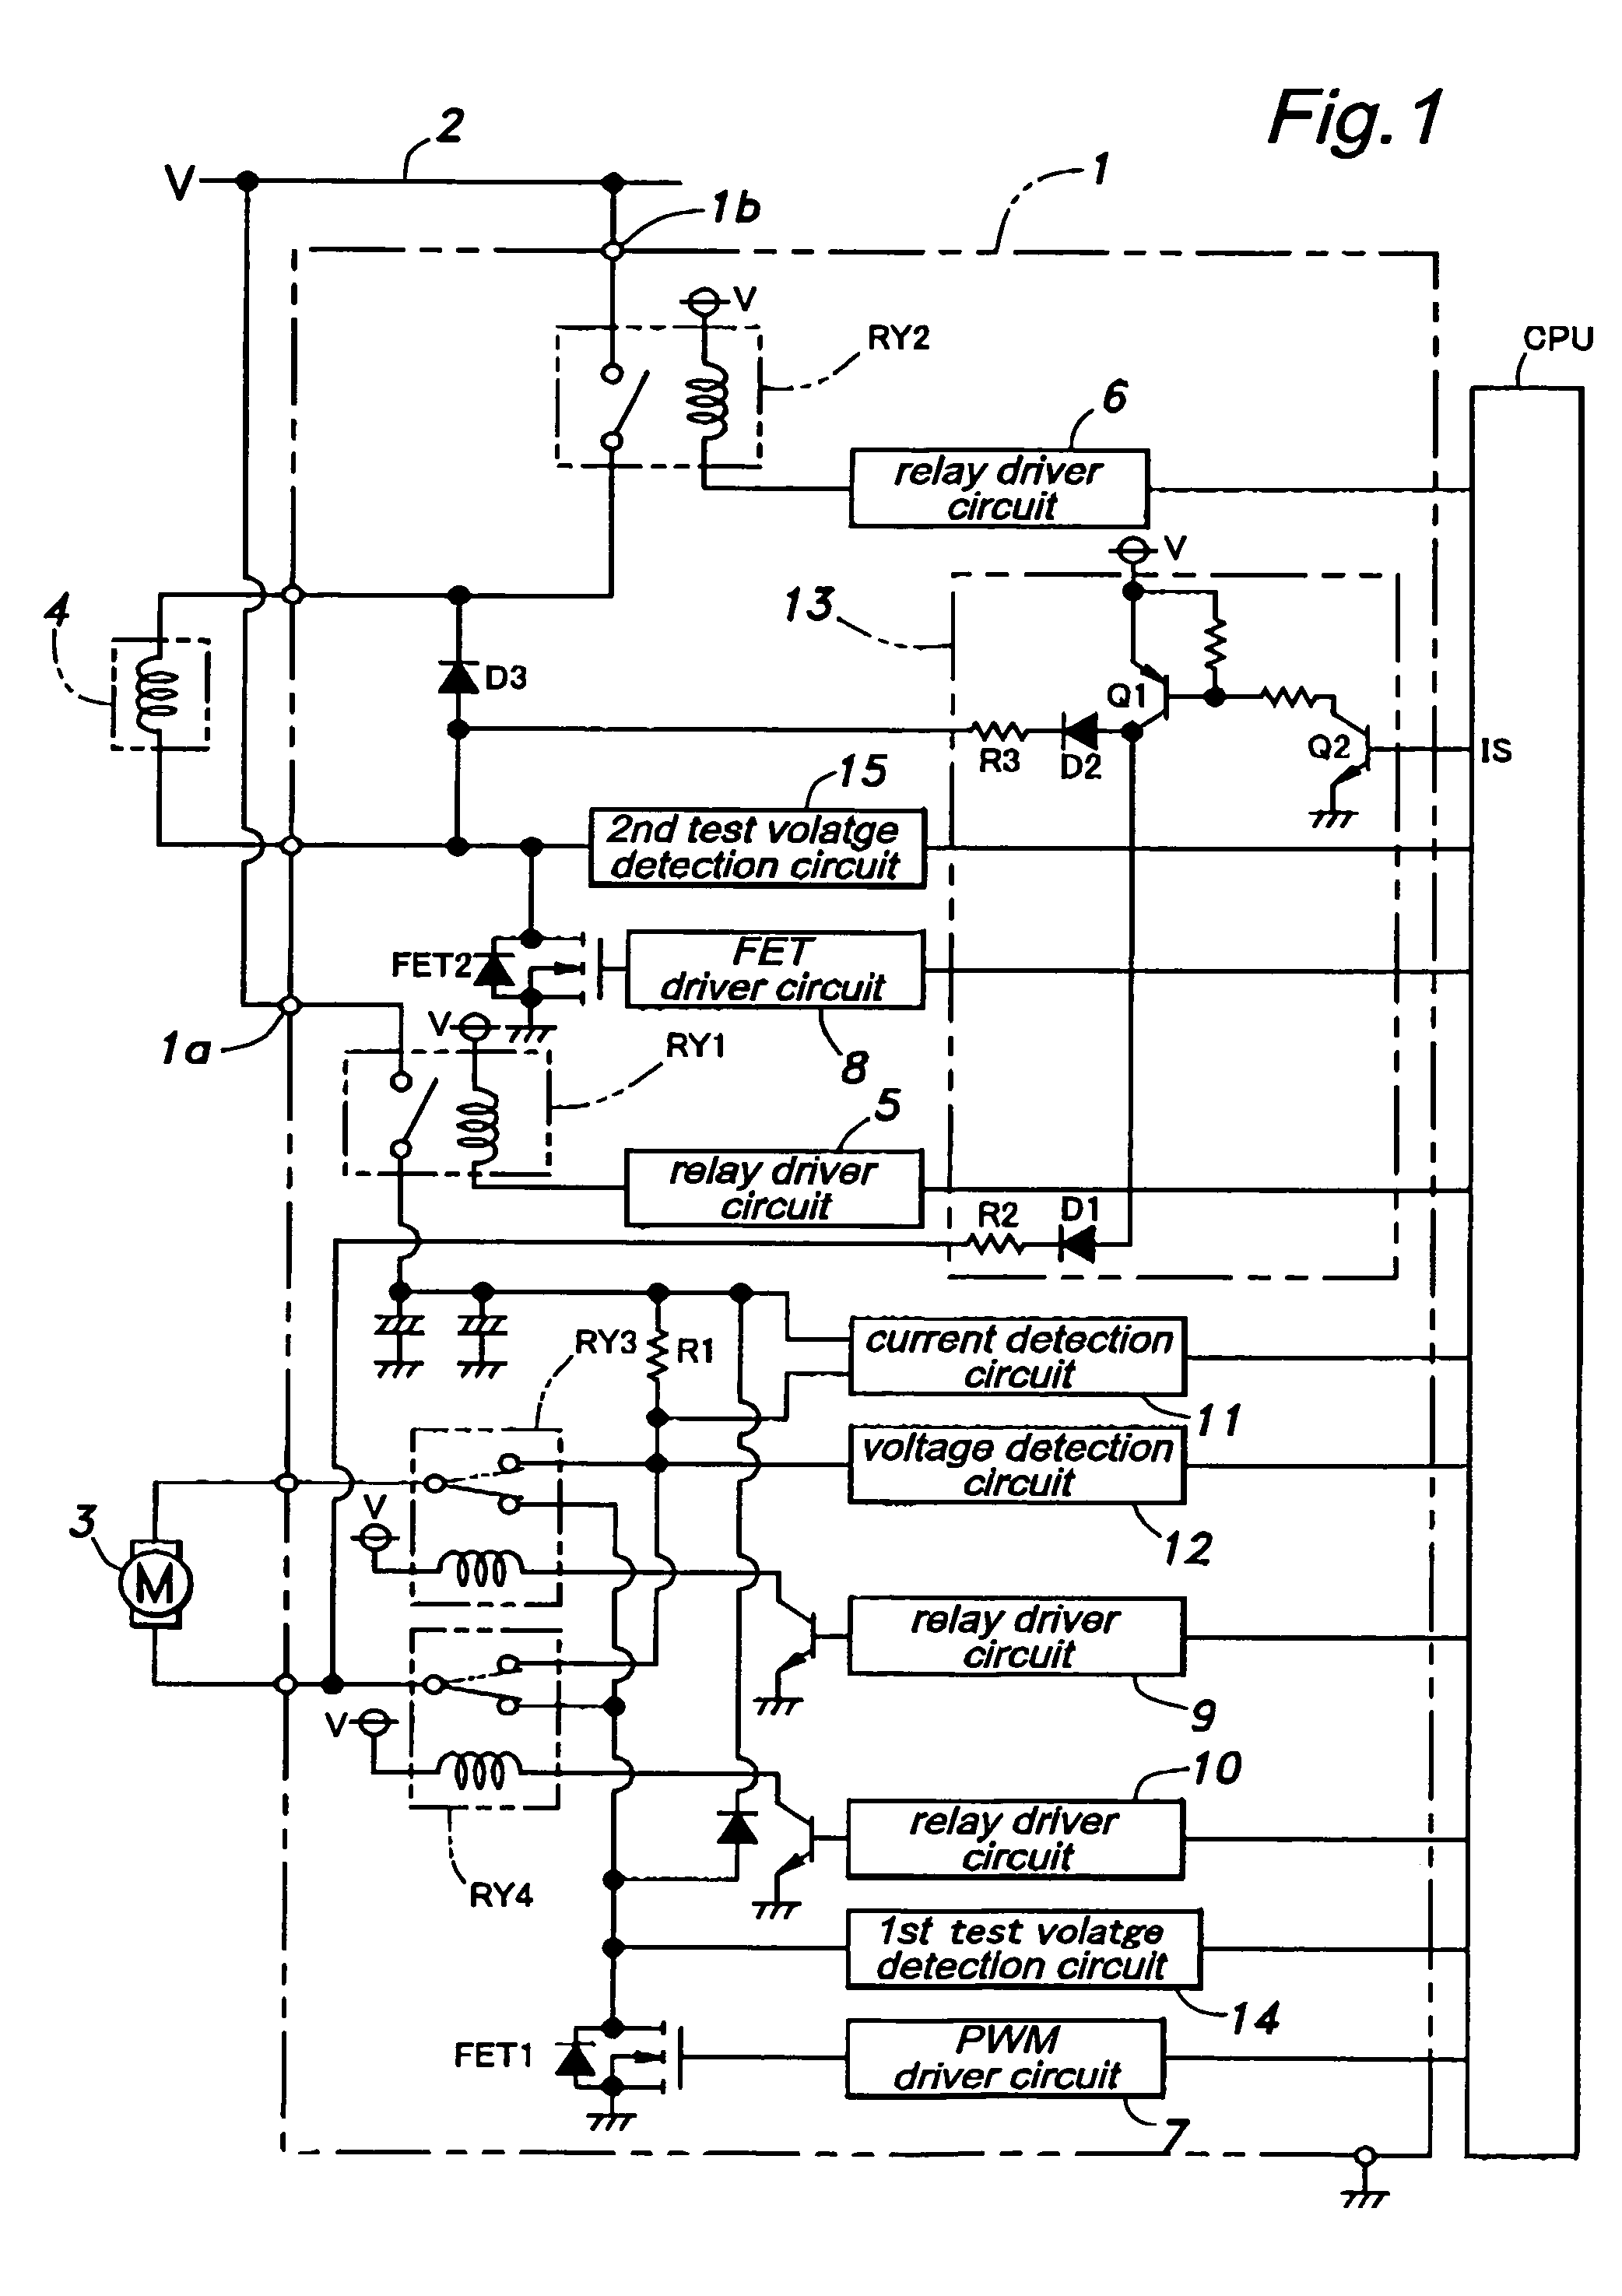 Fault detection circuit for a driver circuit